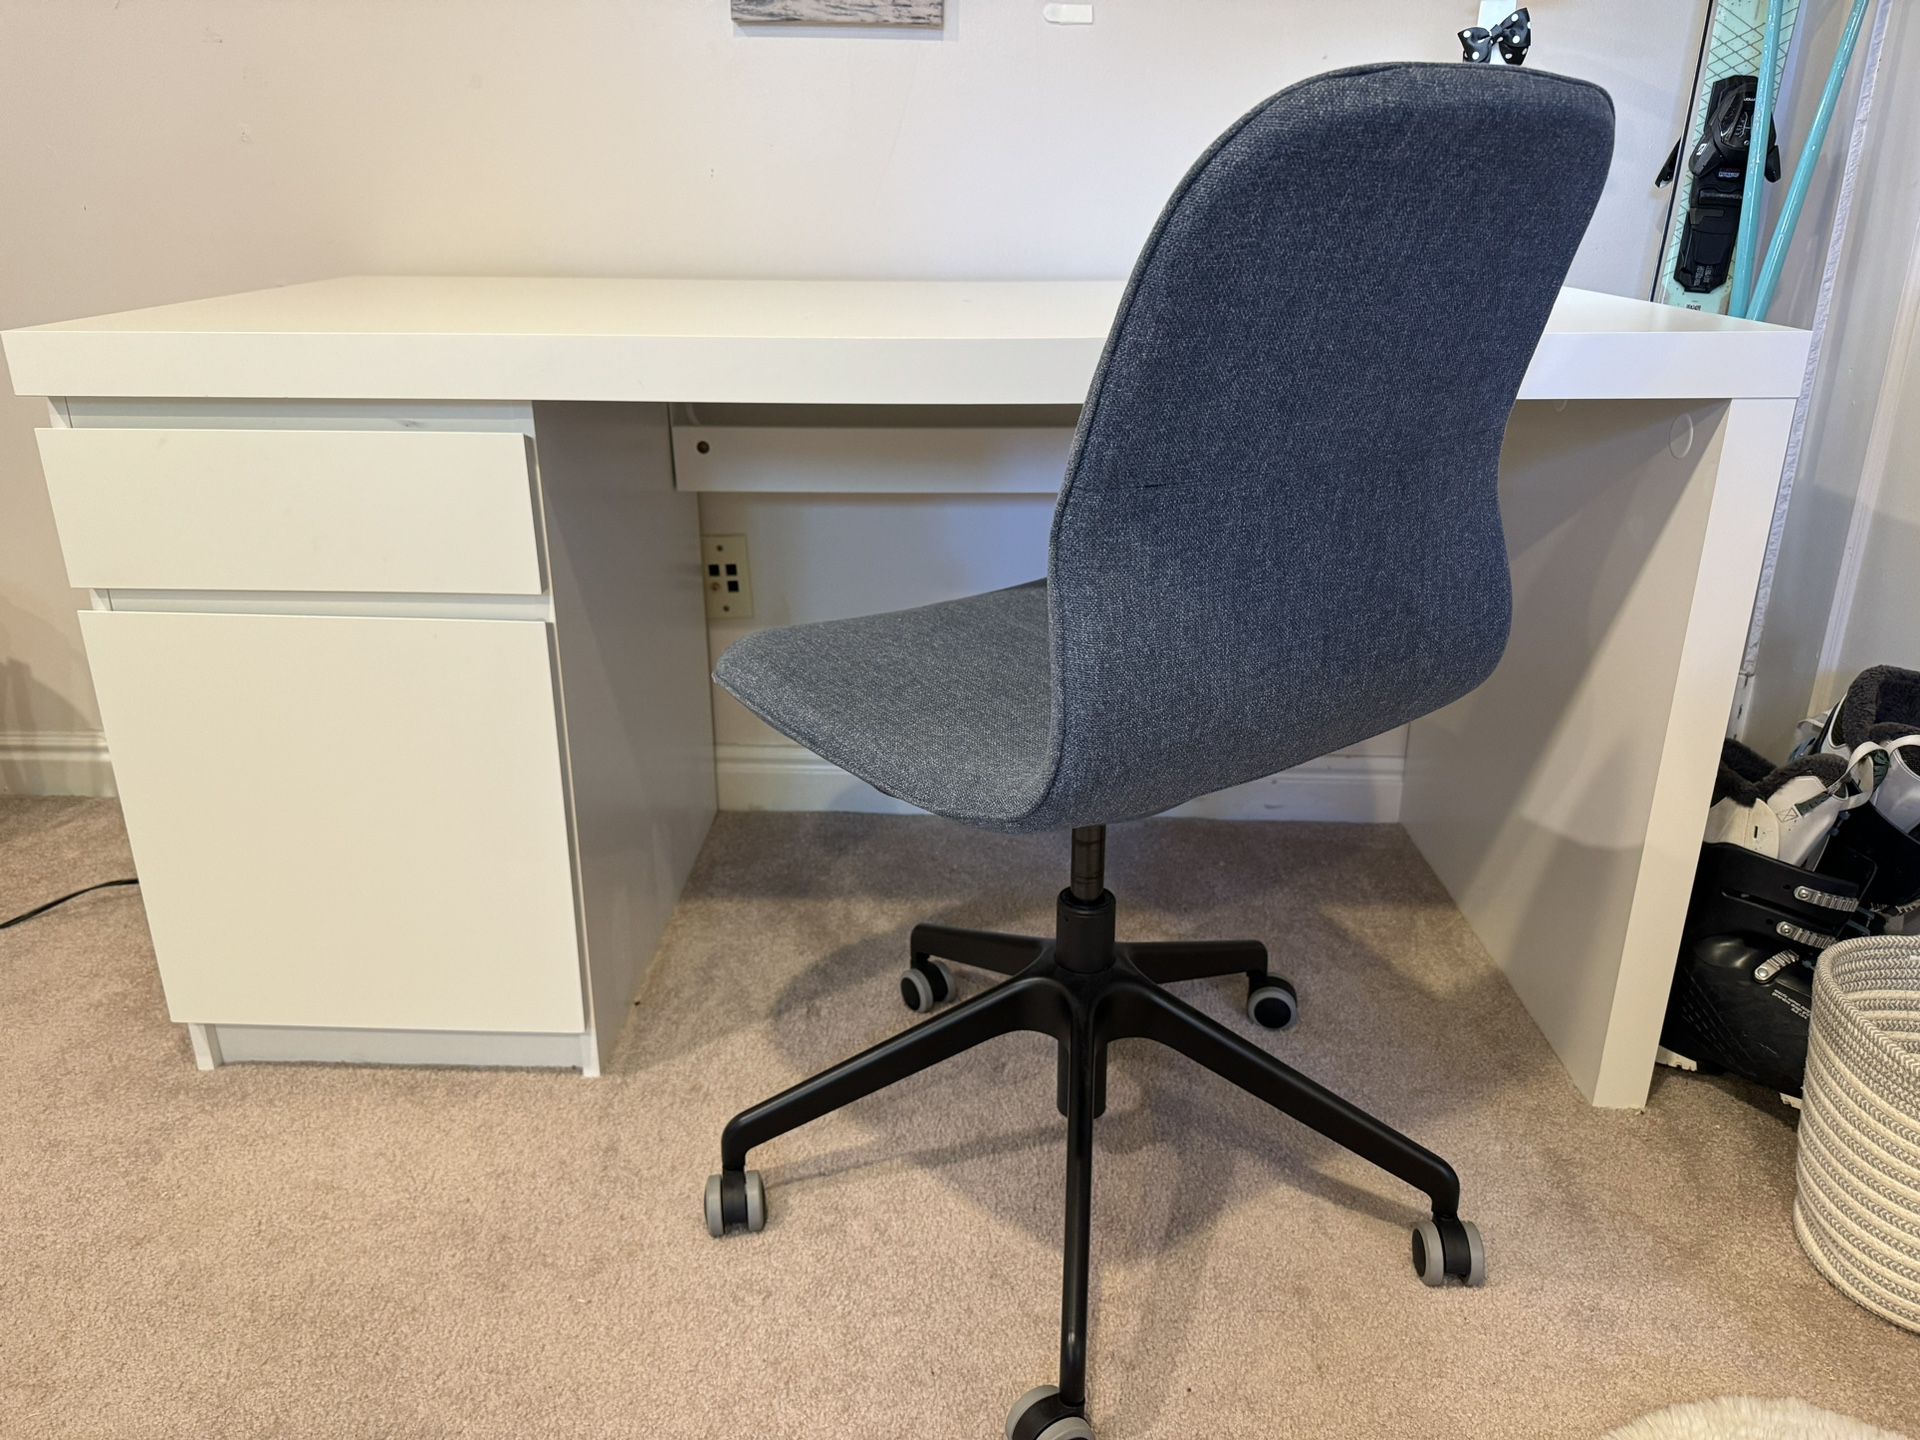 IKEA MALM desk and IKEA LANGFJALL desk chair (can be purchased seperately)